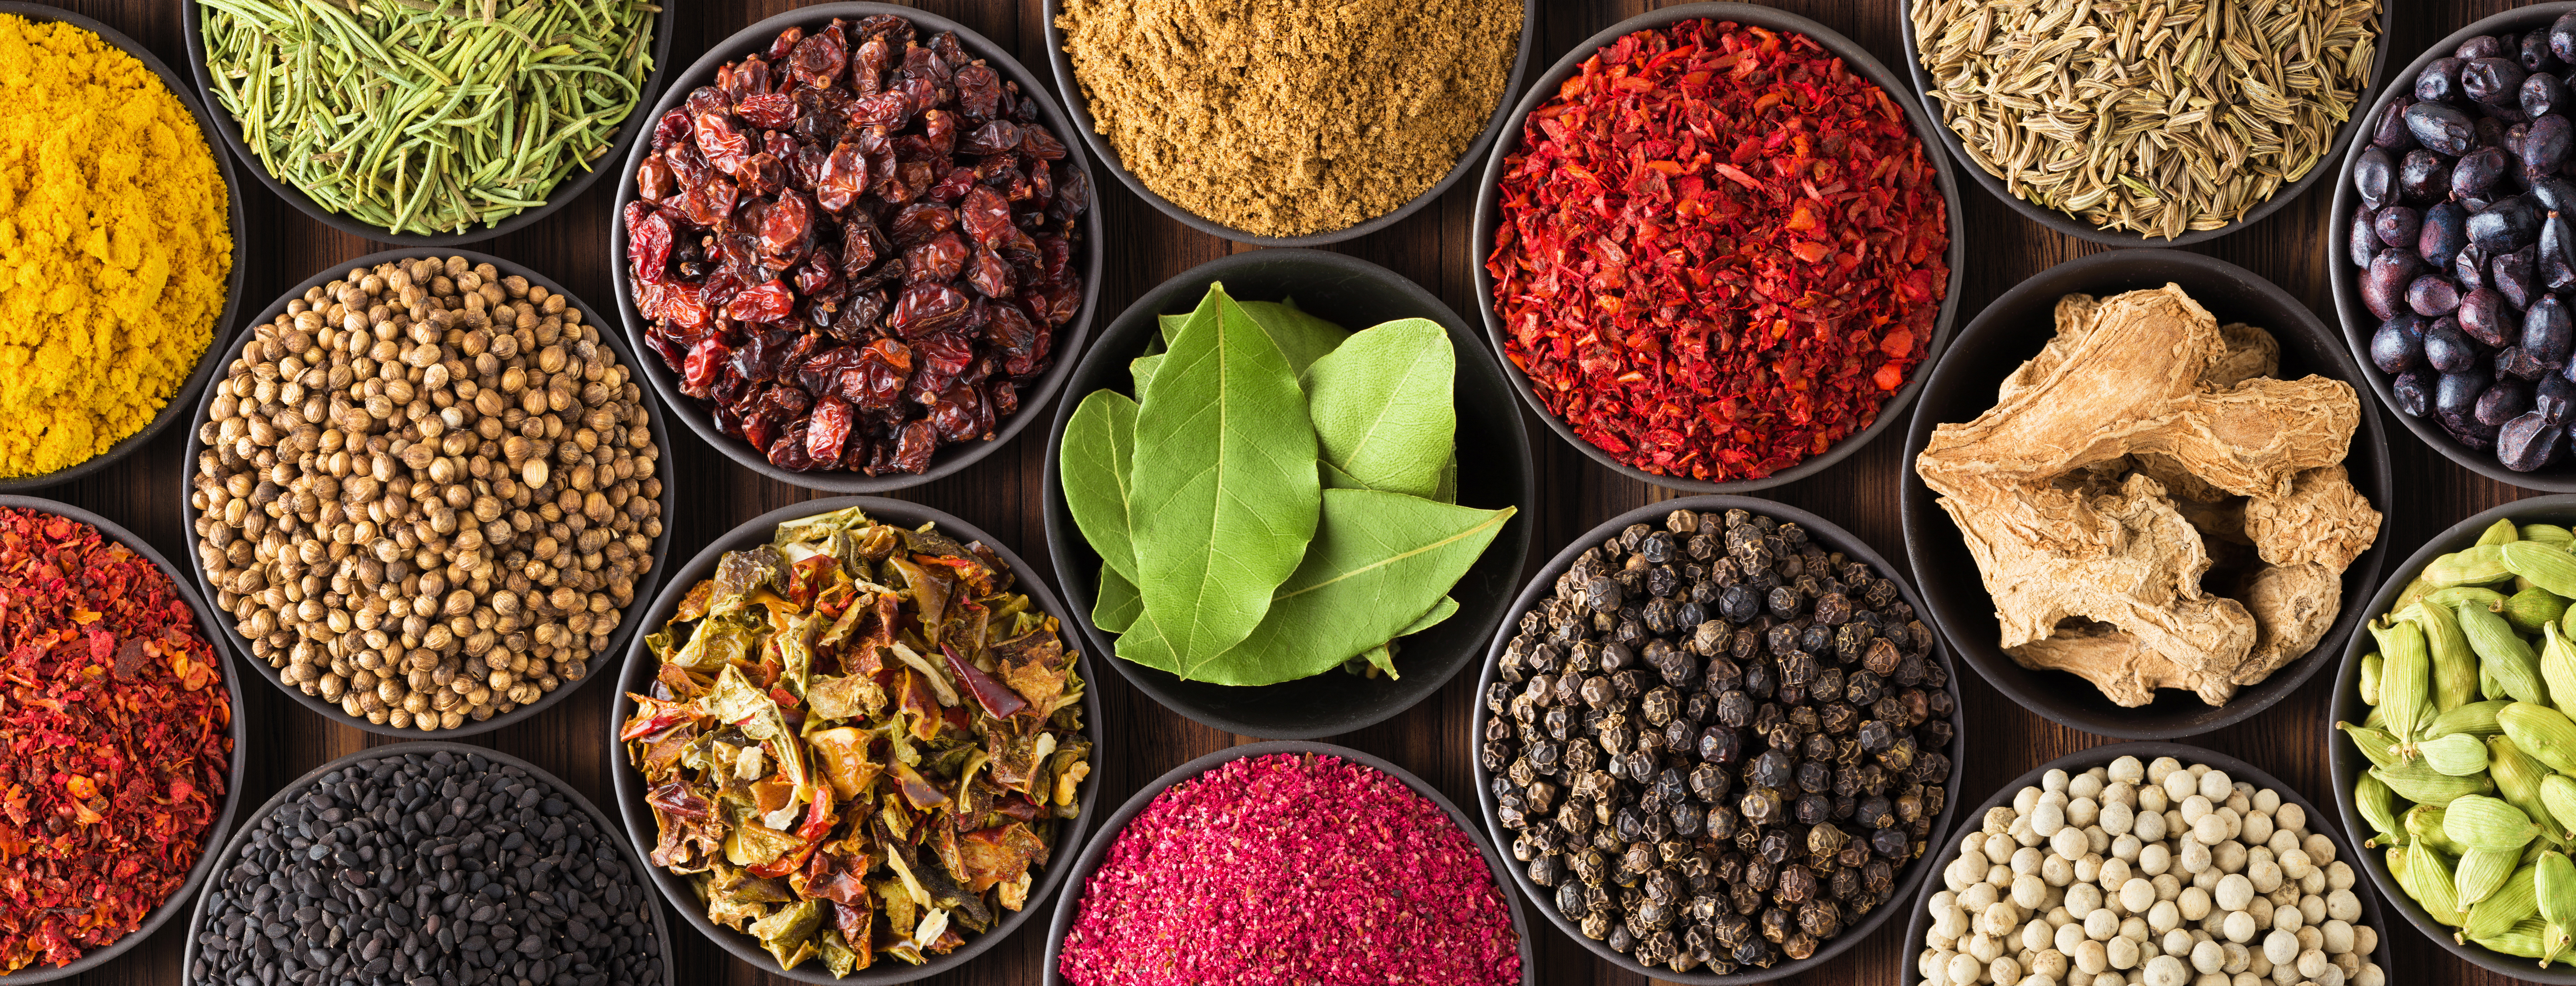 colored-spice-background-top-view-collection-indian-seasoning-cups.jpg